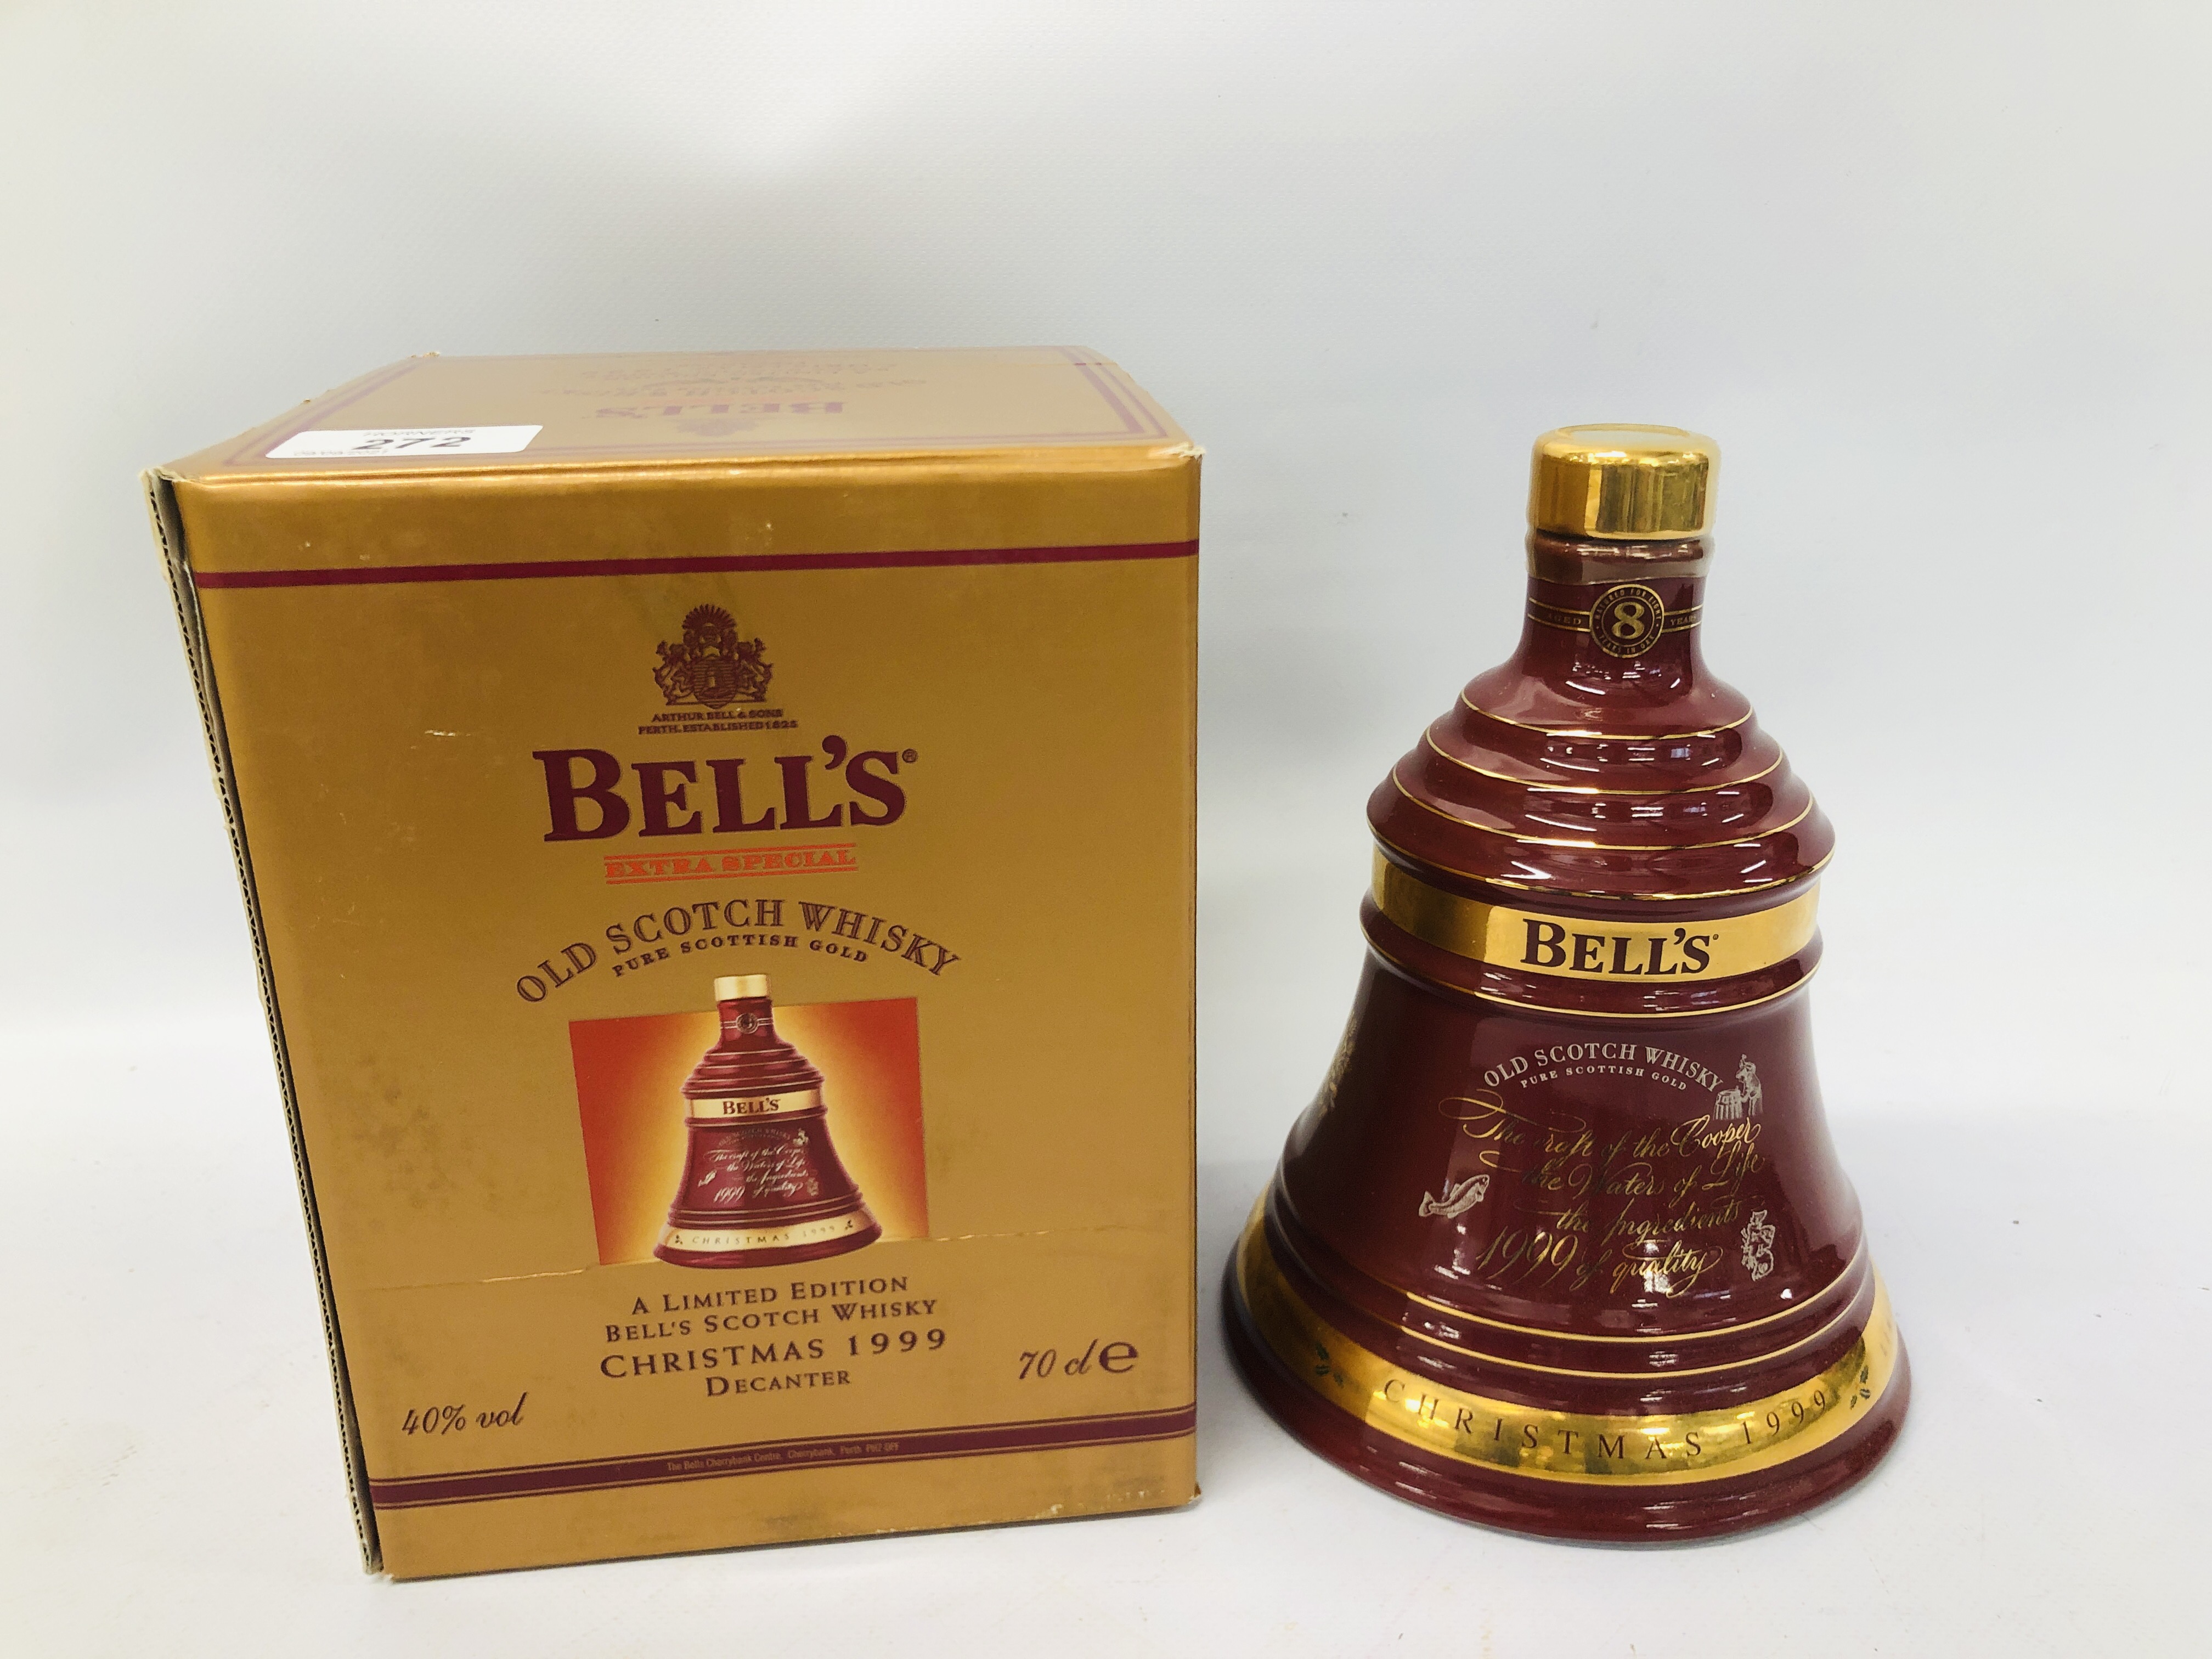 BELLS OLD SCOTCH WHISKY L EDITION CHRISTMAS 1999 DECANTER 70CL (BOXED)